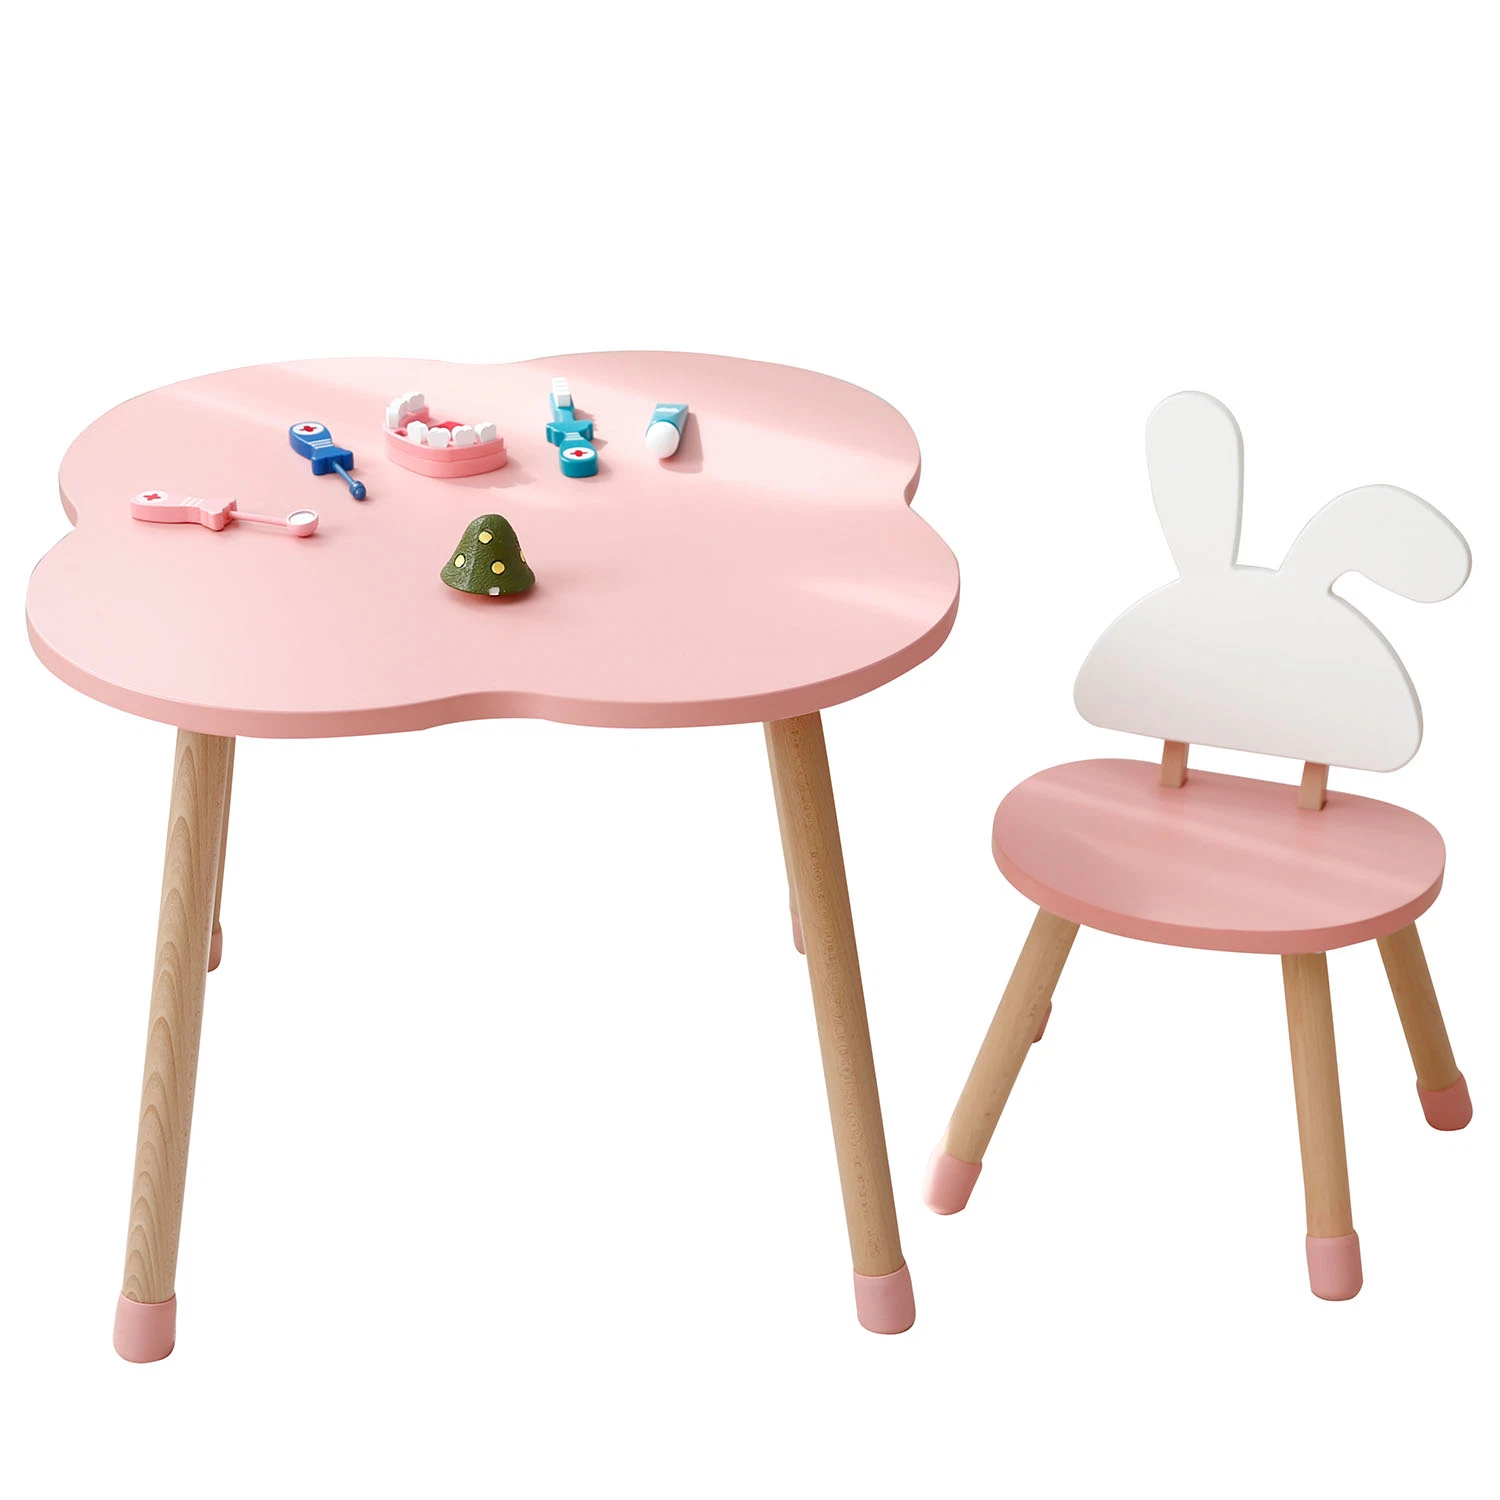 Factory Hot Sale High Quality Cartoon Colorful Furniture Sets Kids Wooden Study Table and Chair Sets